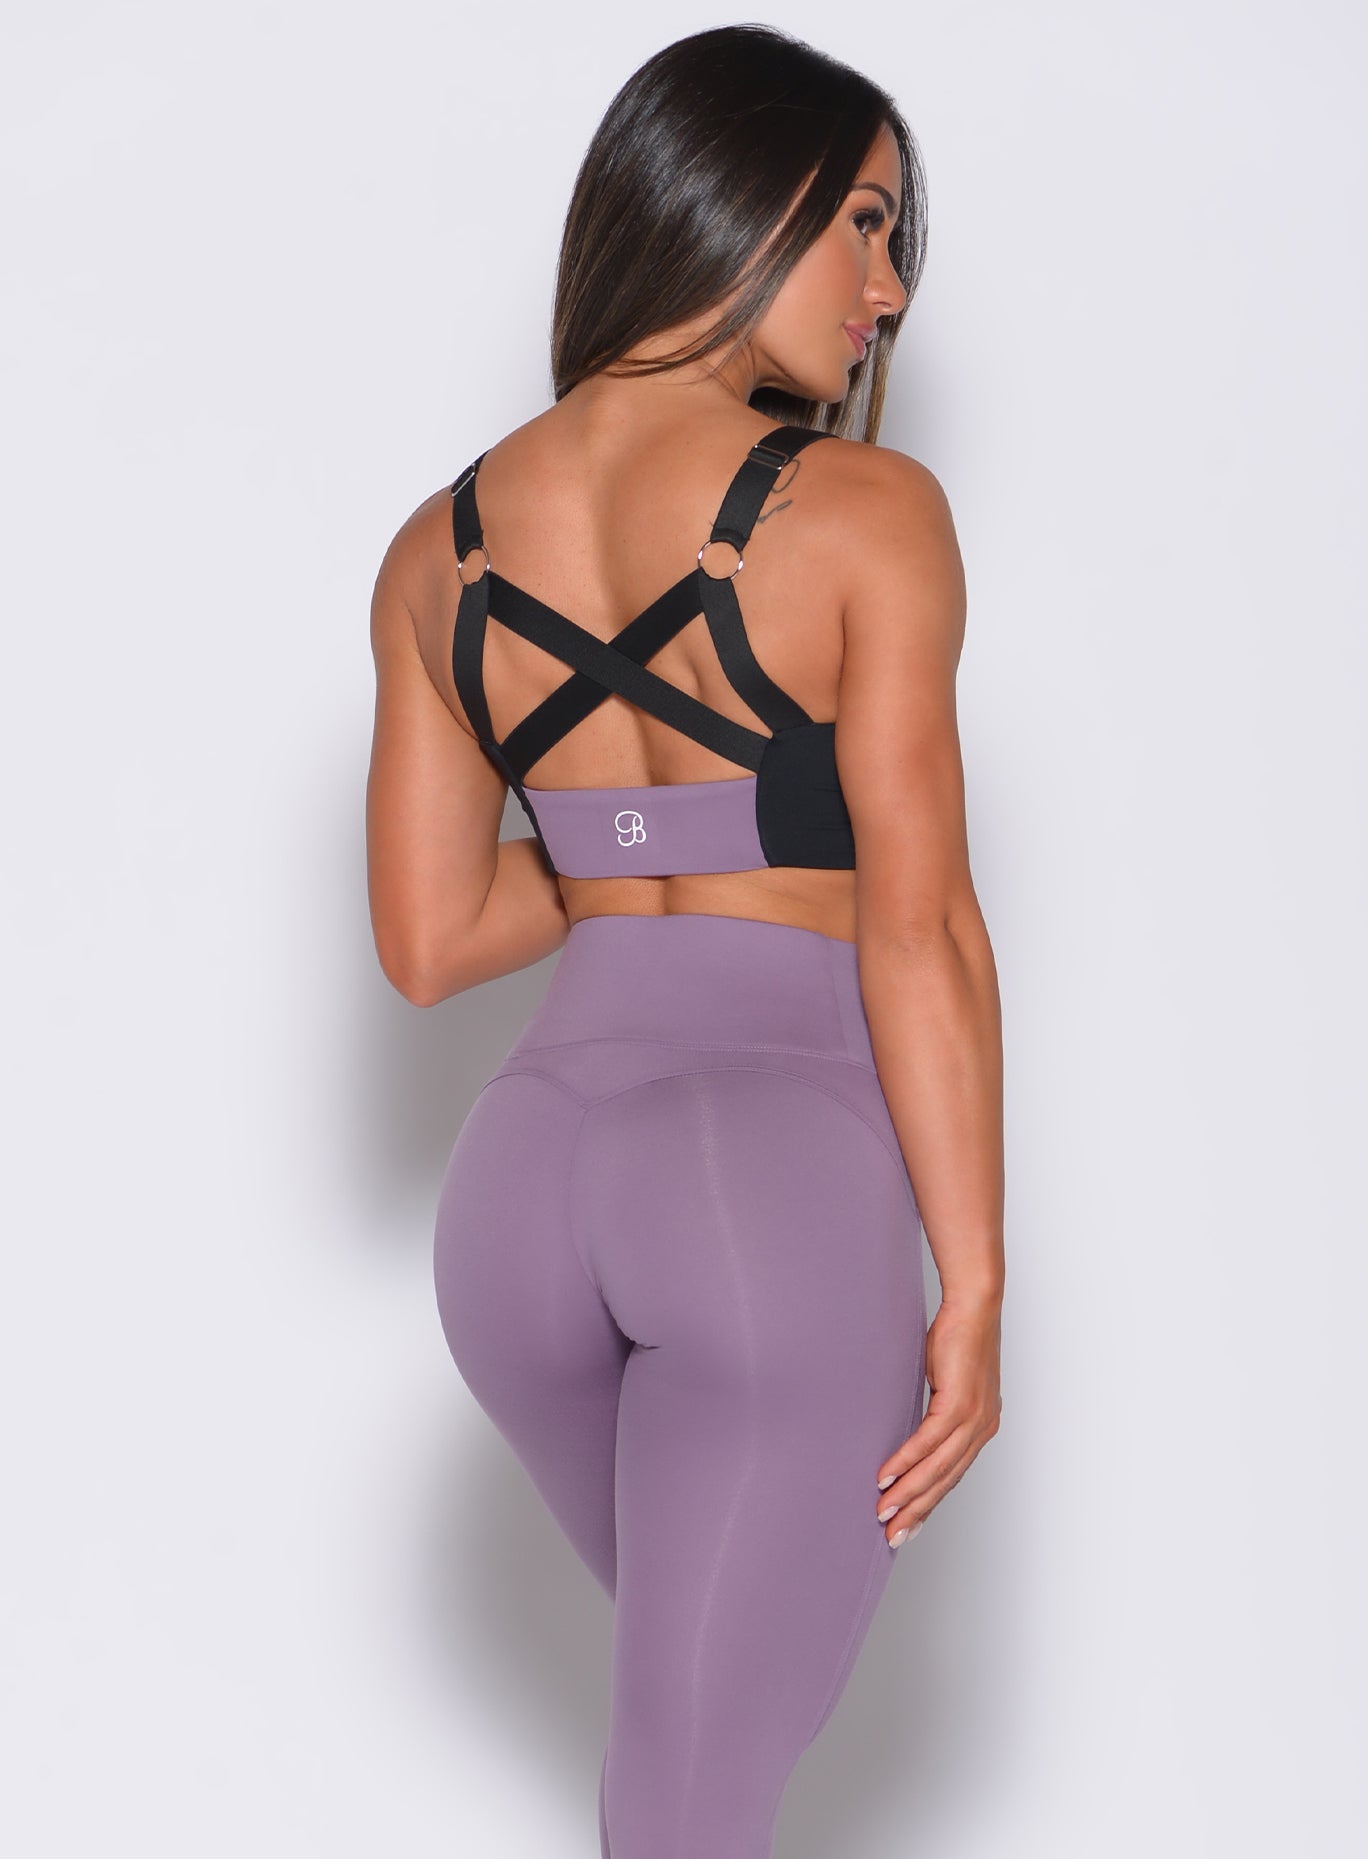 Back profile view of a model facing to her right wearing  our banded sports bra in violet frost color and a matching leggings